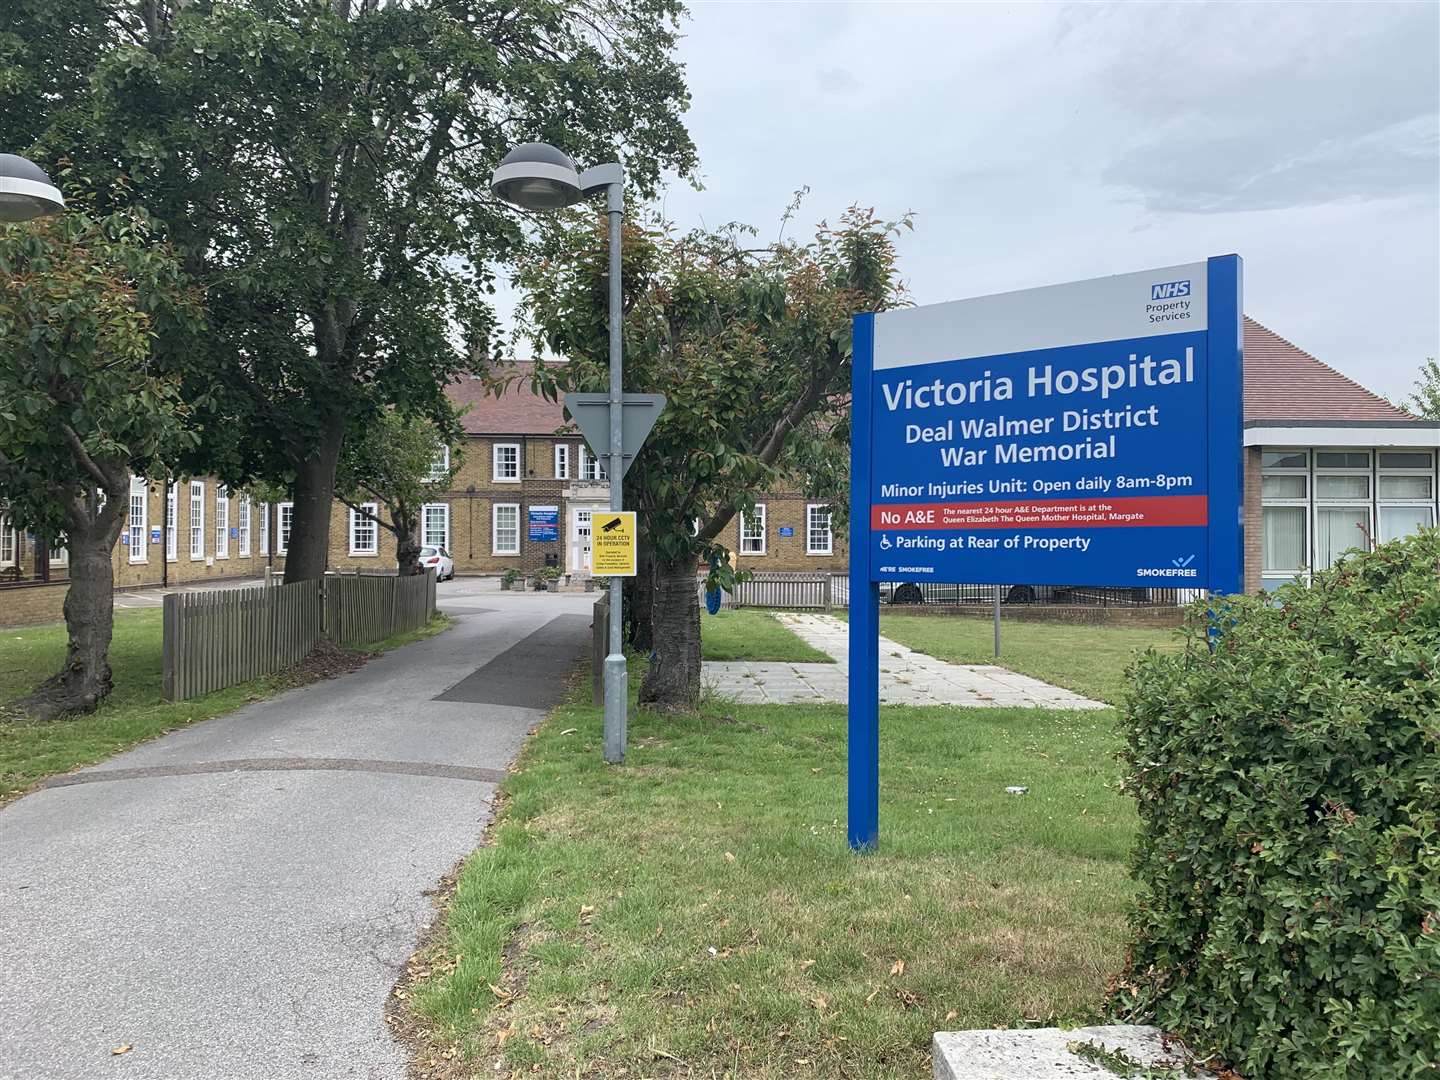 The blood service has stopped at Deal hospital